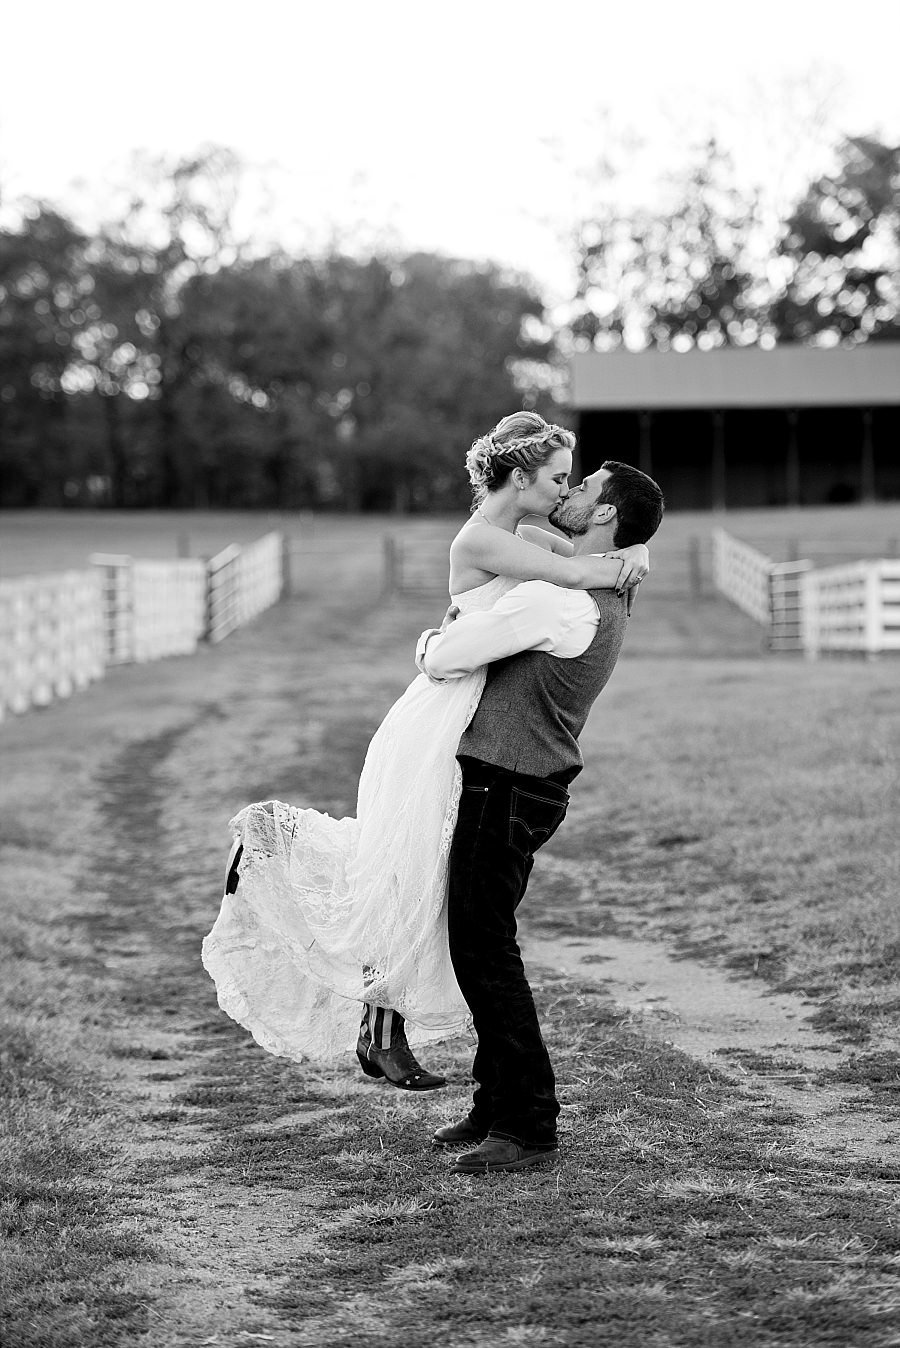 Black and White photo of groom lifting his wife and sharing a kiss on a country road with white fences around